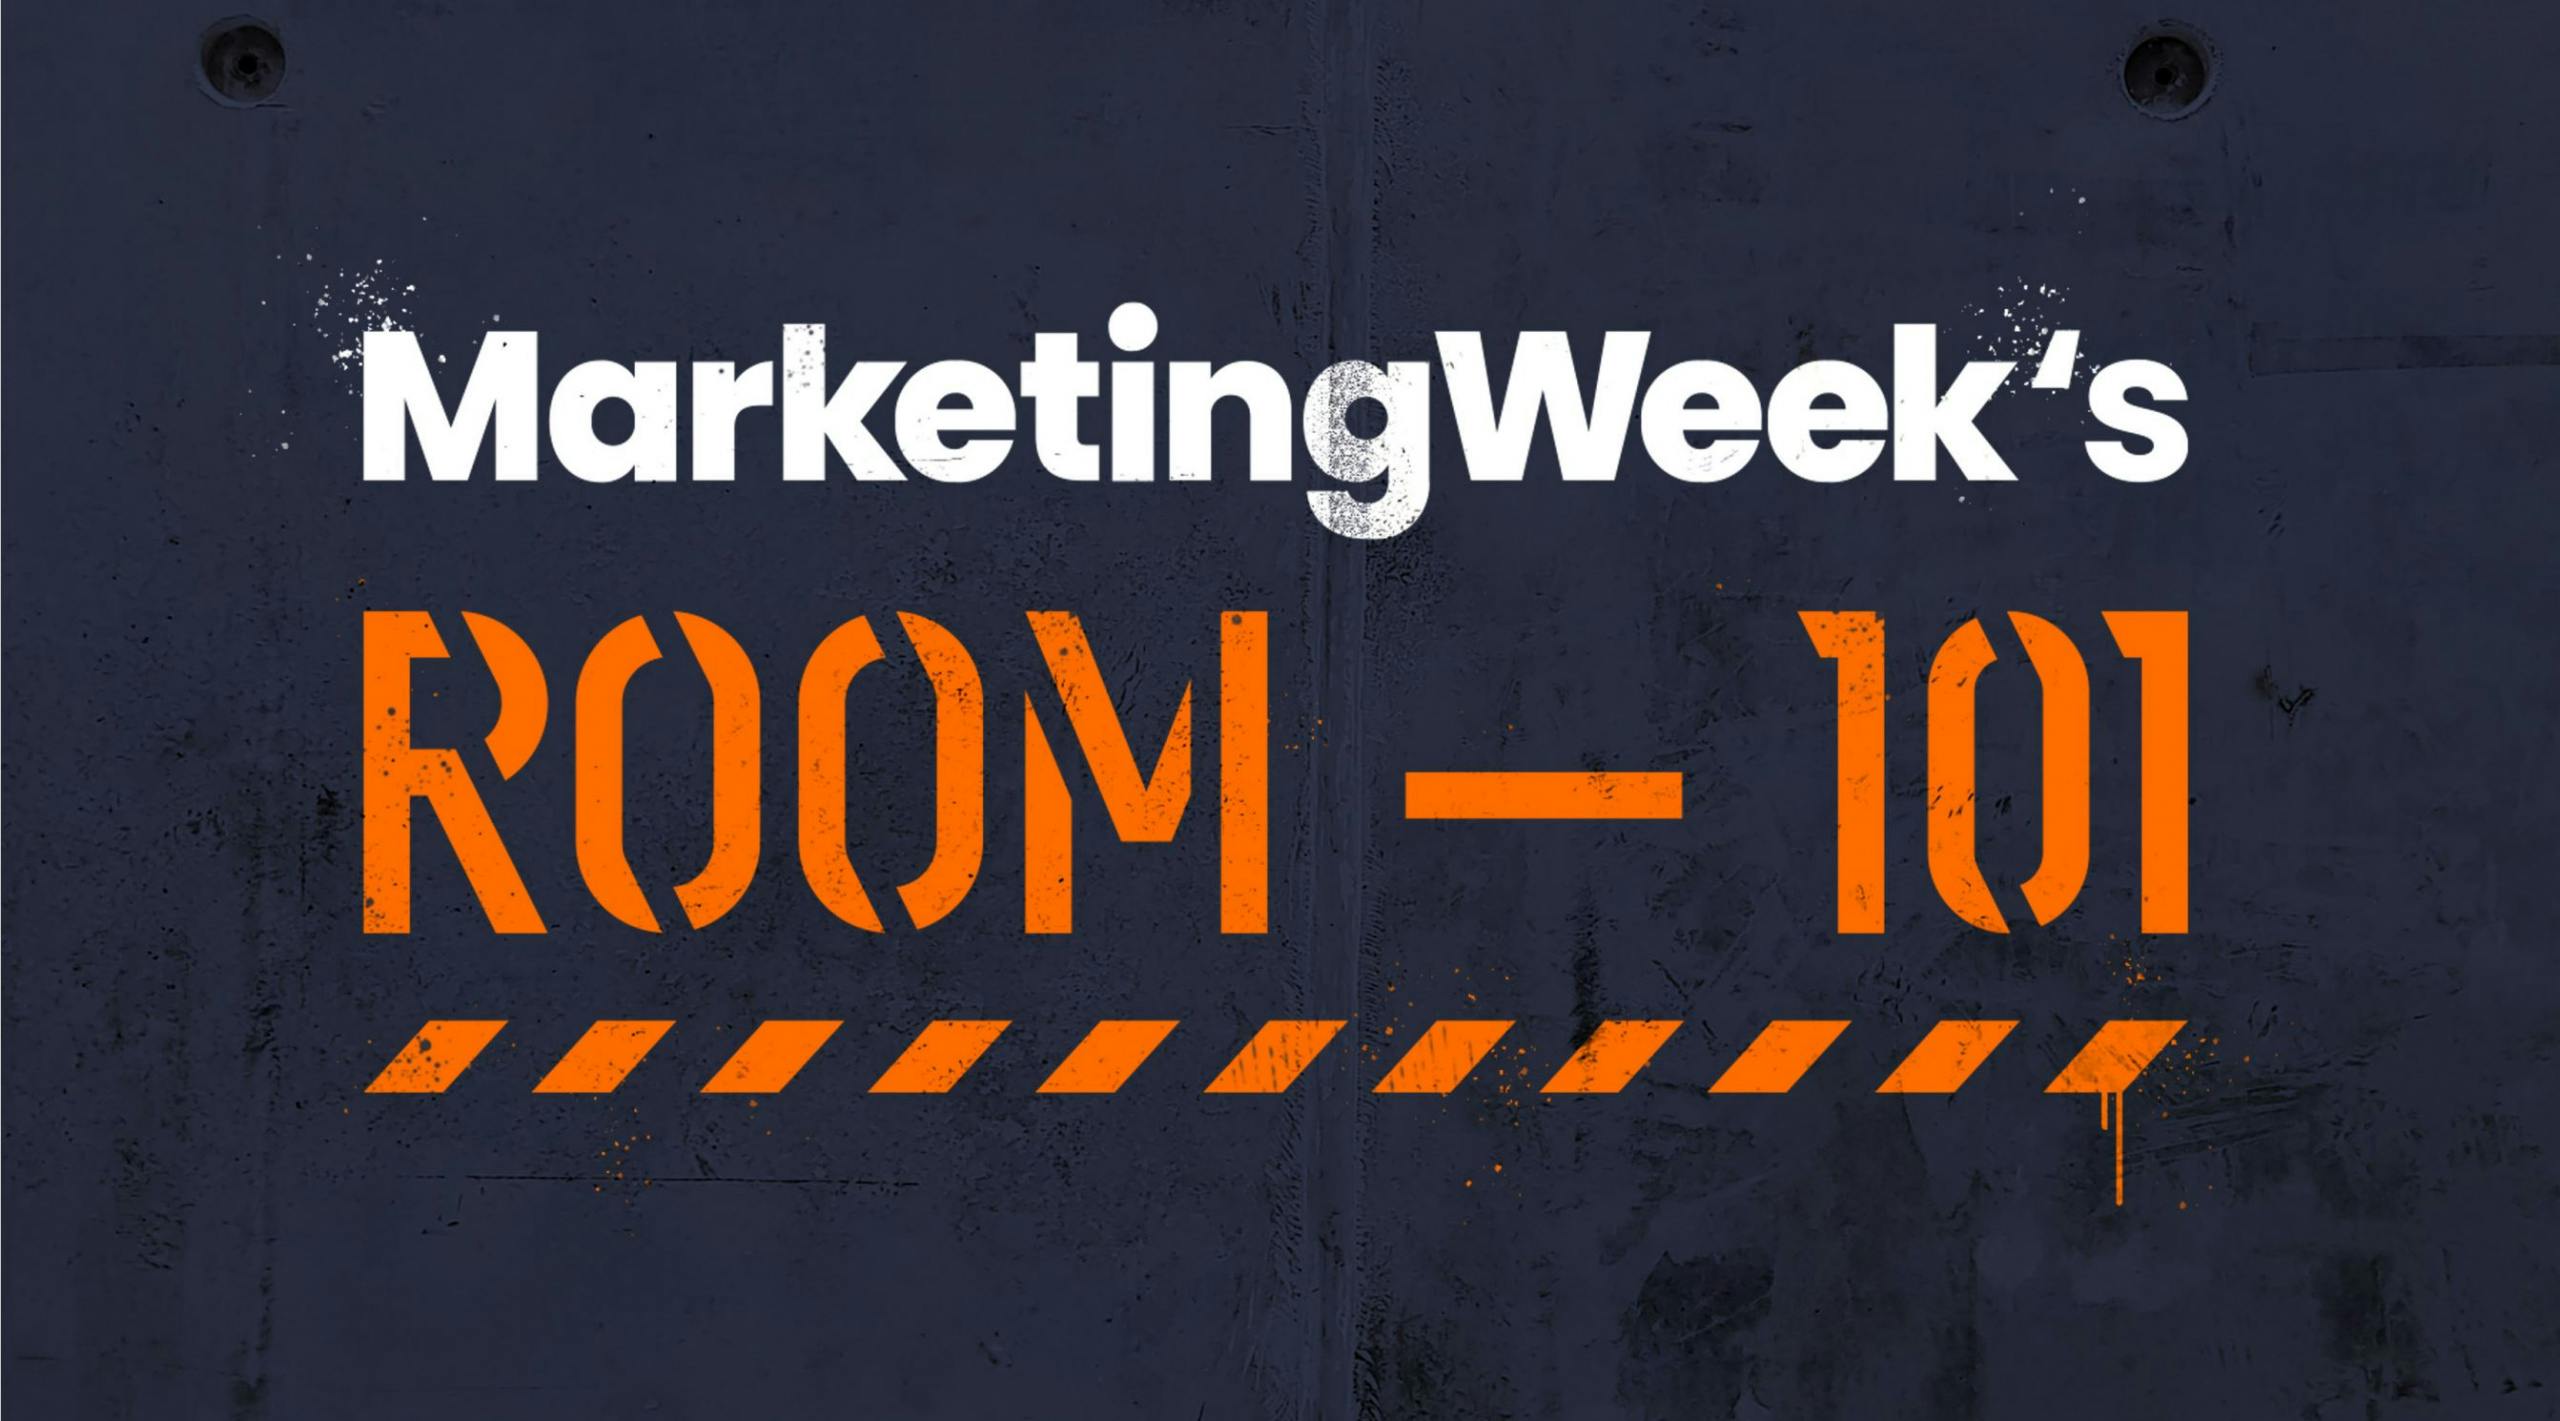 What will get consigned to Marketing Week’s Room 101?